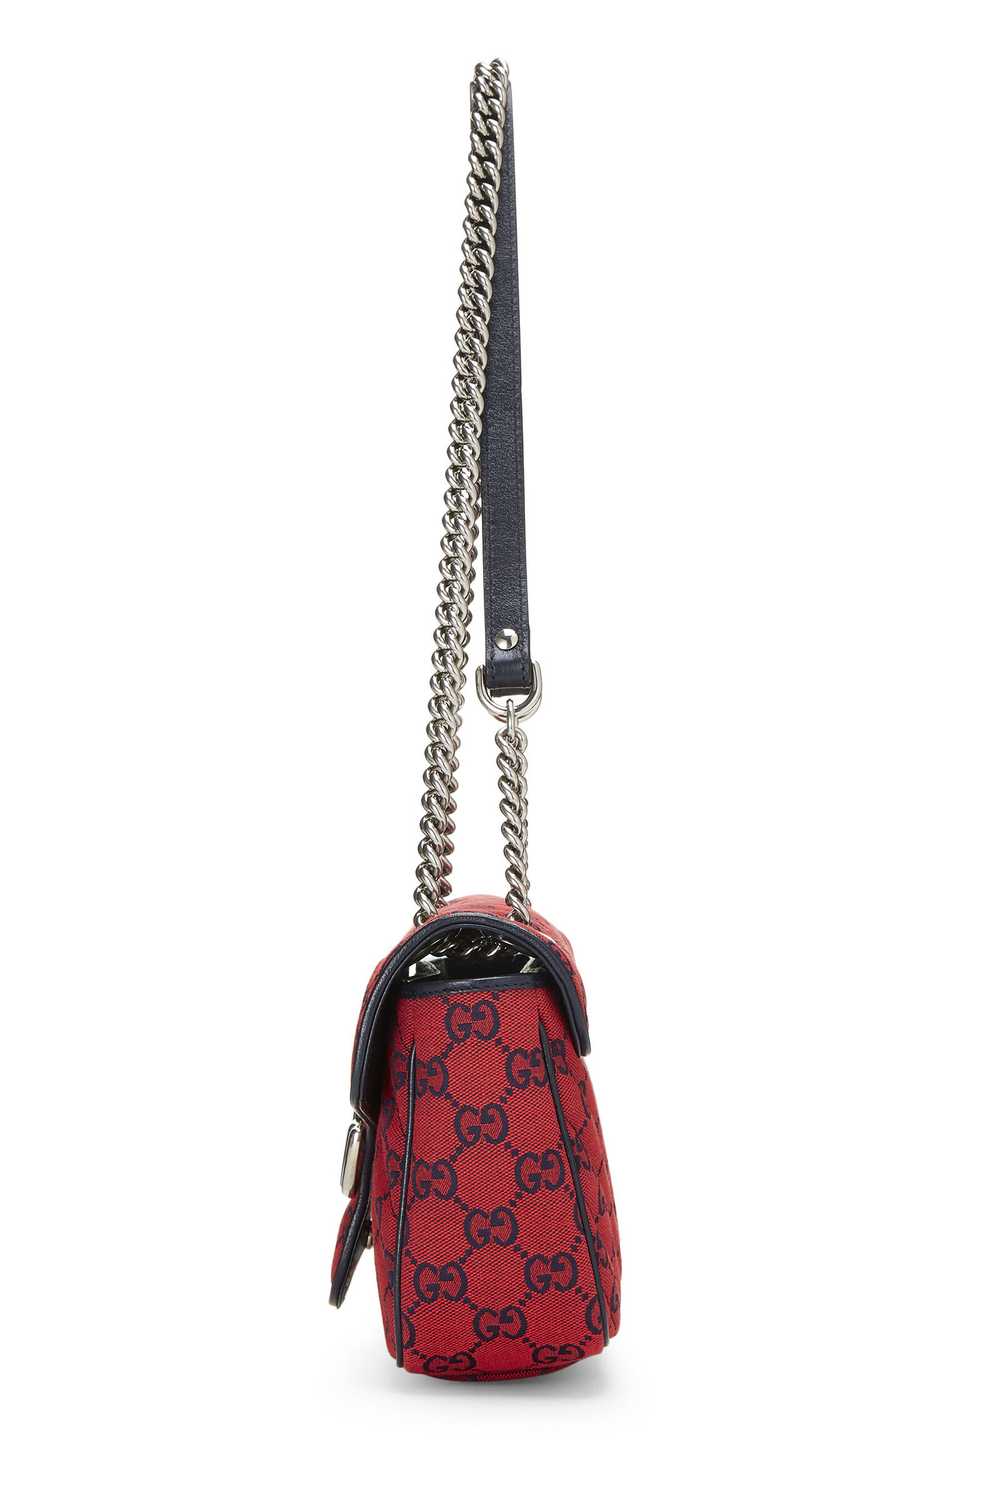 Red GG Canvas Marmont Shoulder Bag Small - image 3